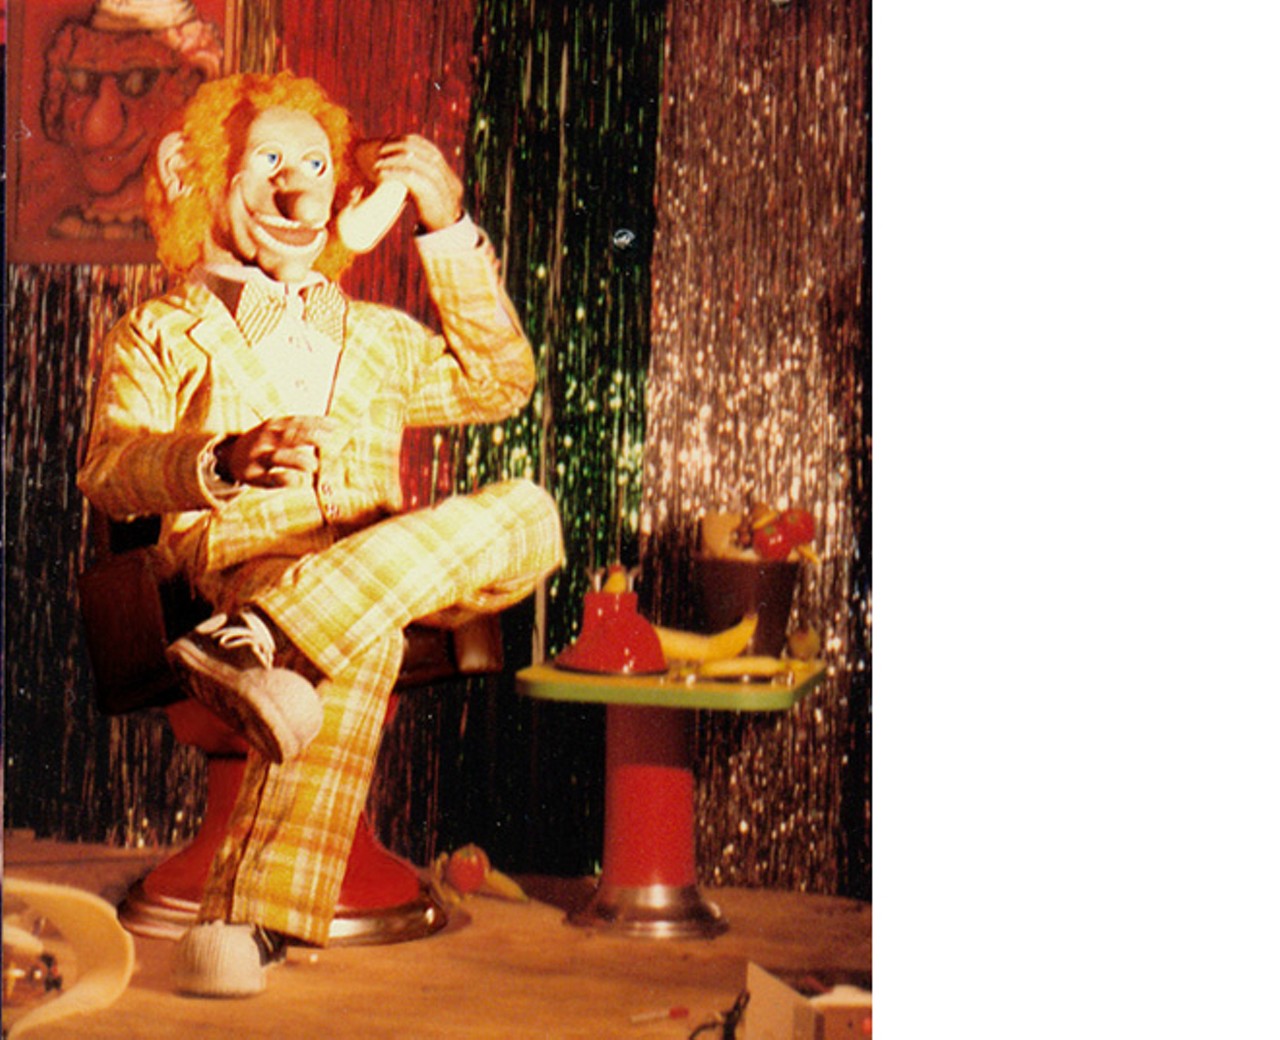 Uncle Klunk was a human character introduced in later years of ShowBiz Pizza. He did a segment called "Dear Uncle Klunk," and he commented on news and culture. Photo via Showbizpizza.com